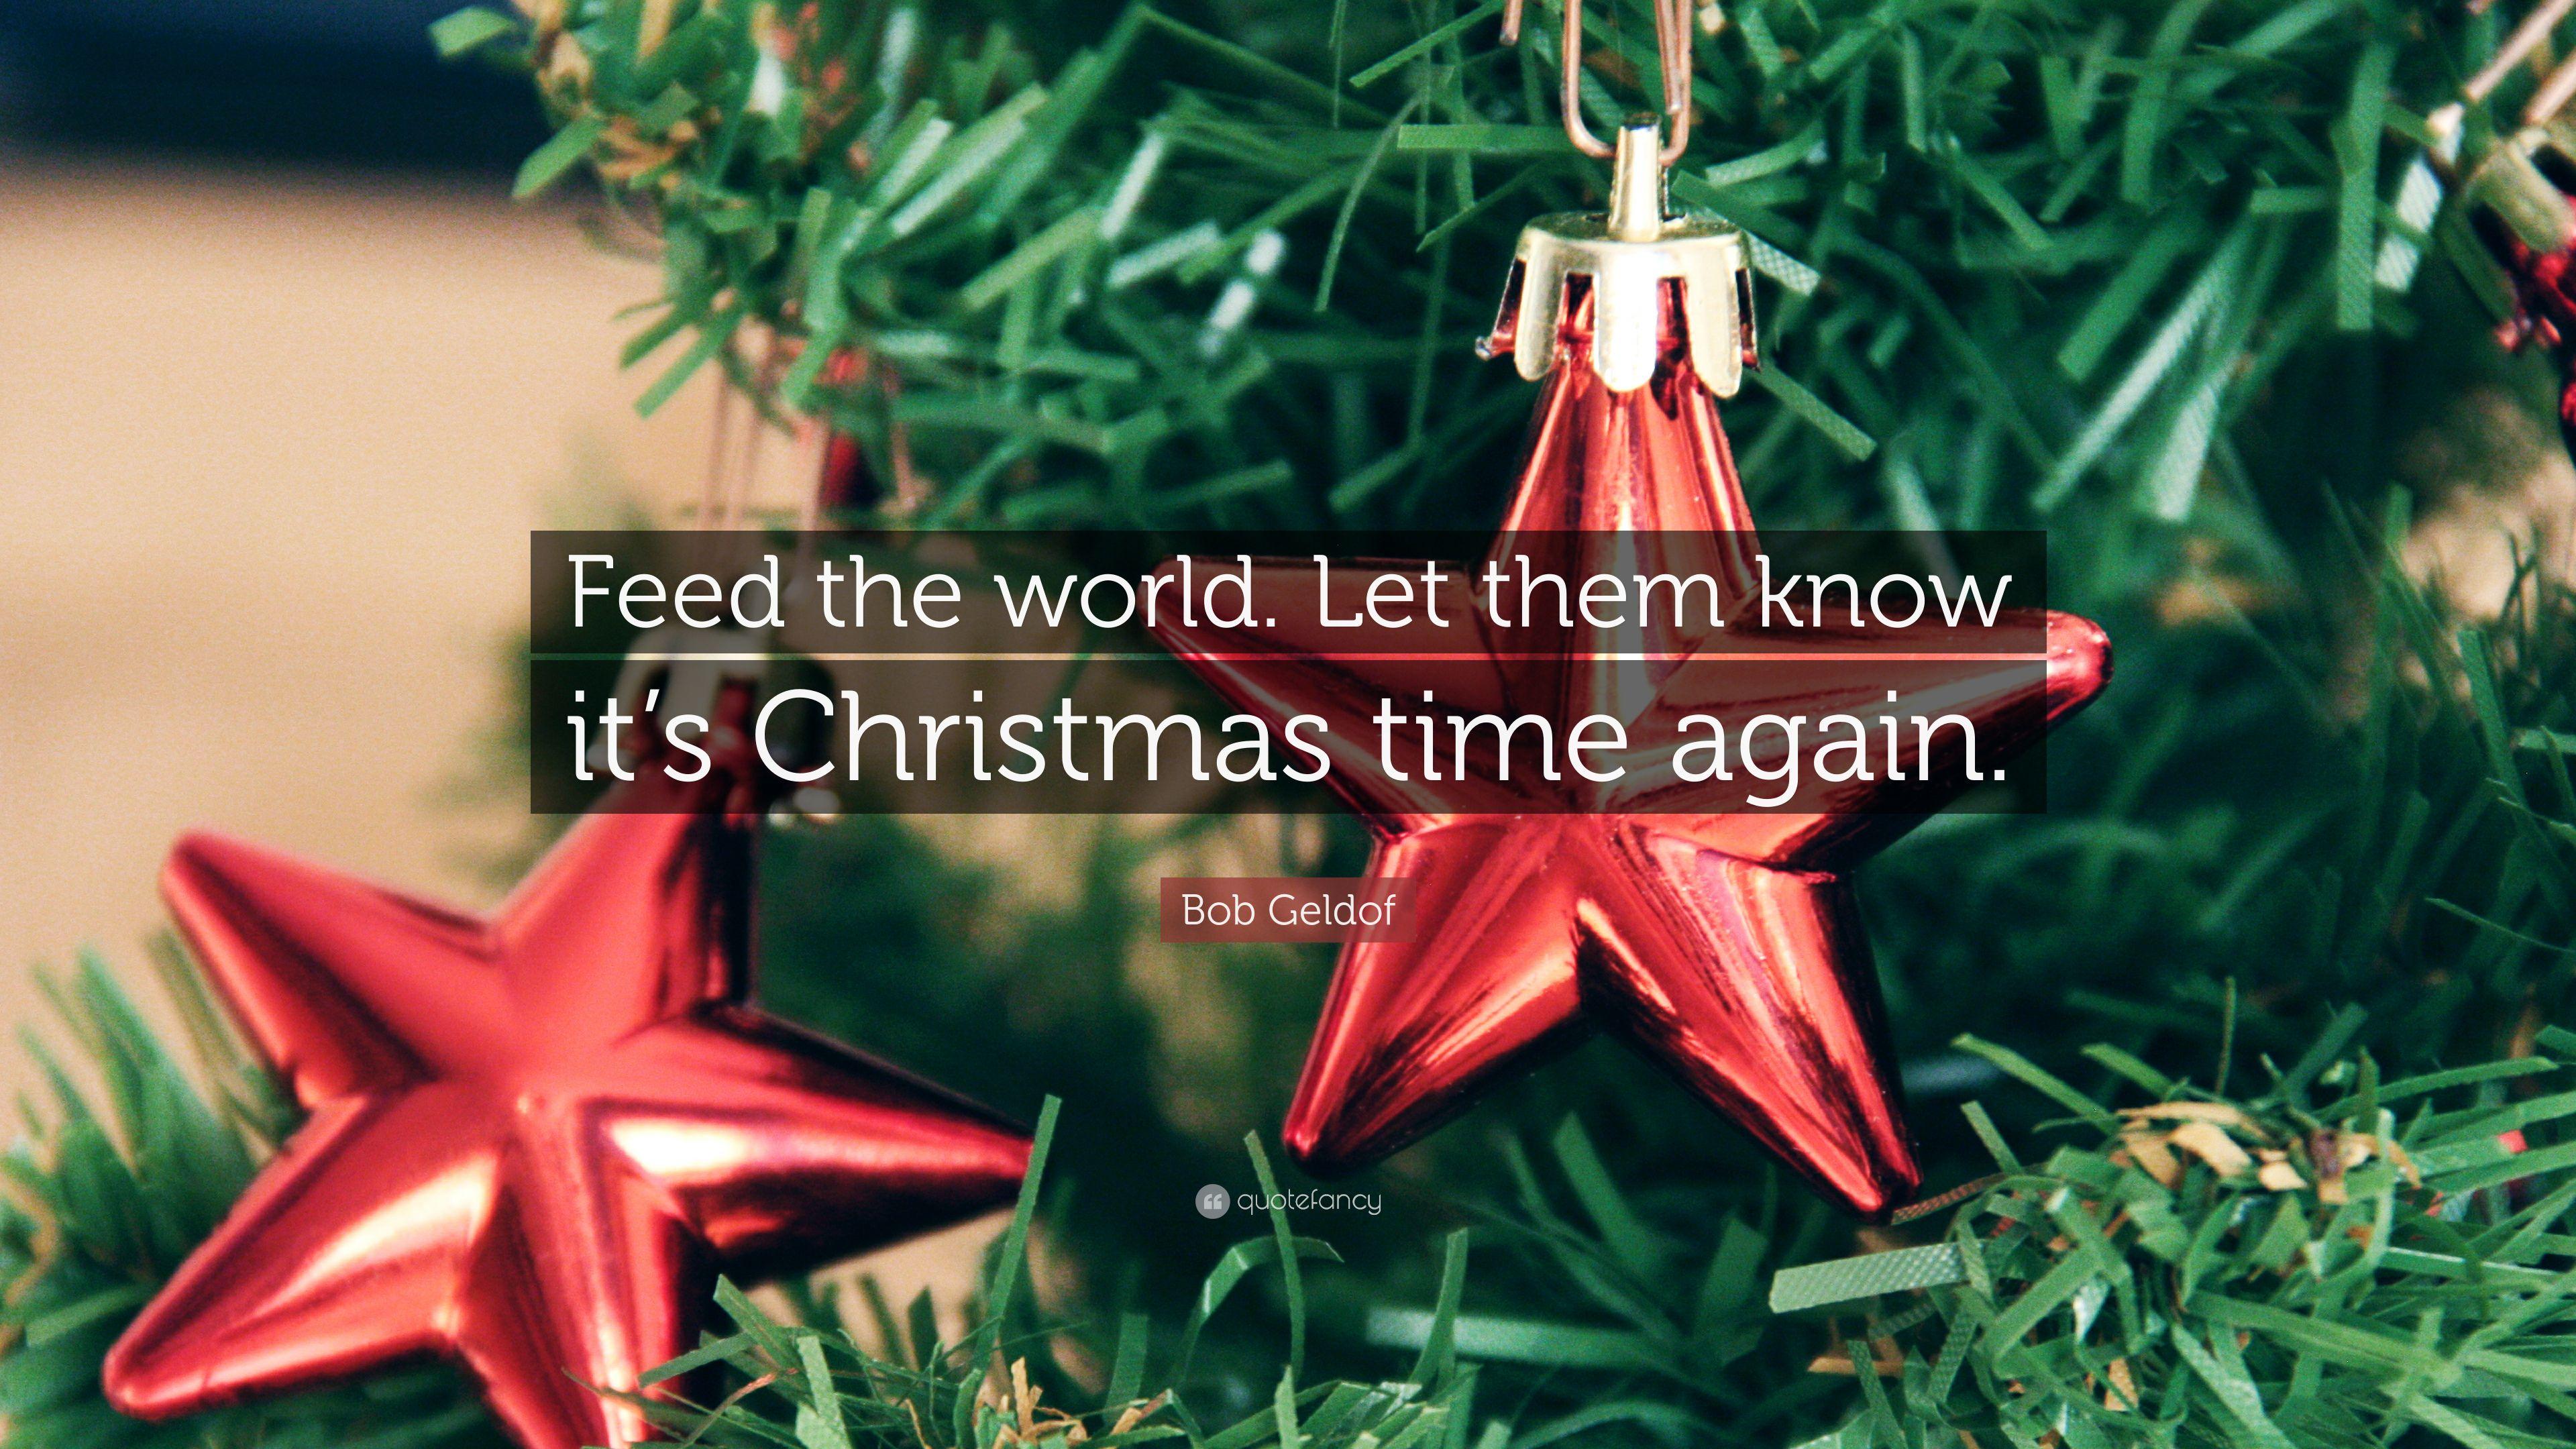 Bob Geldof Quote: “Feed the world. Let them know it's Christmas time